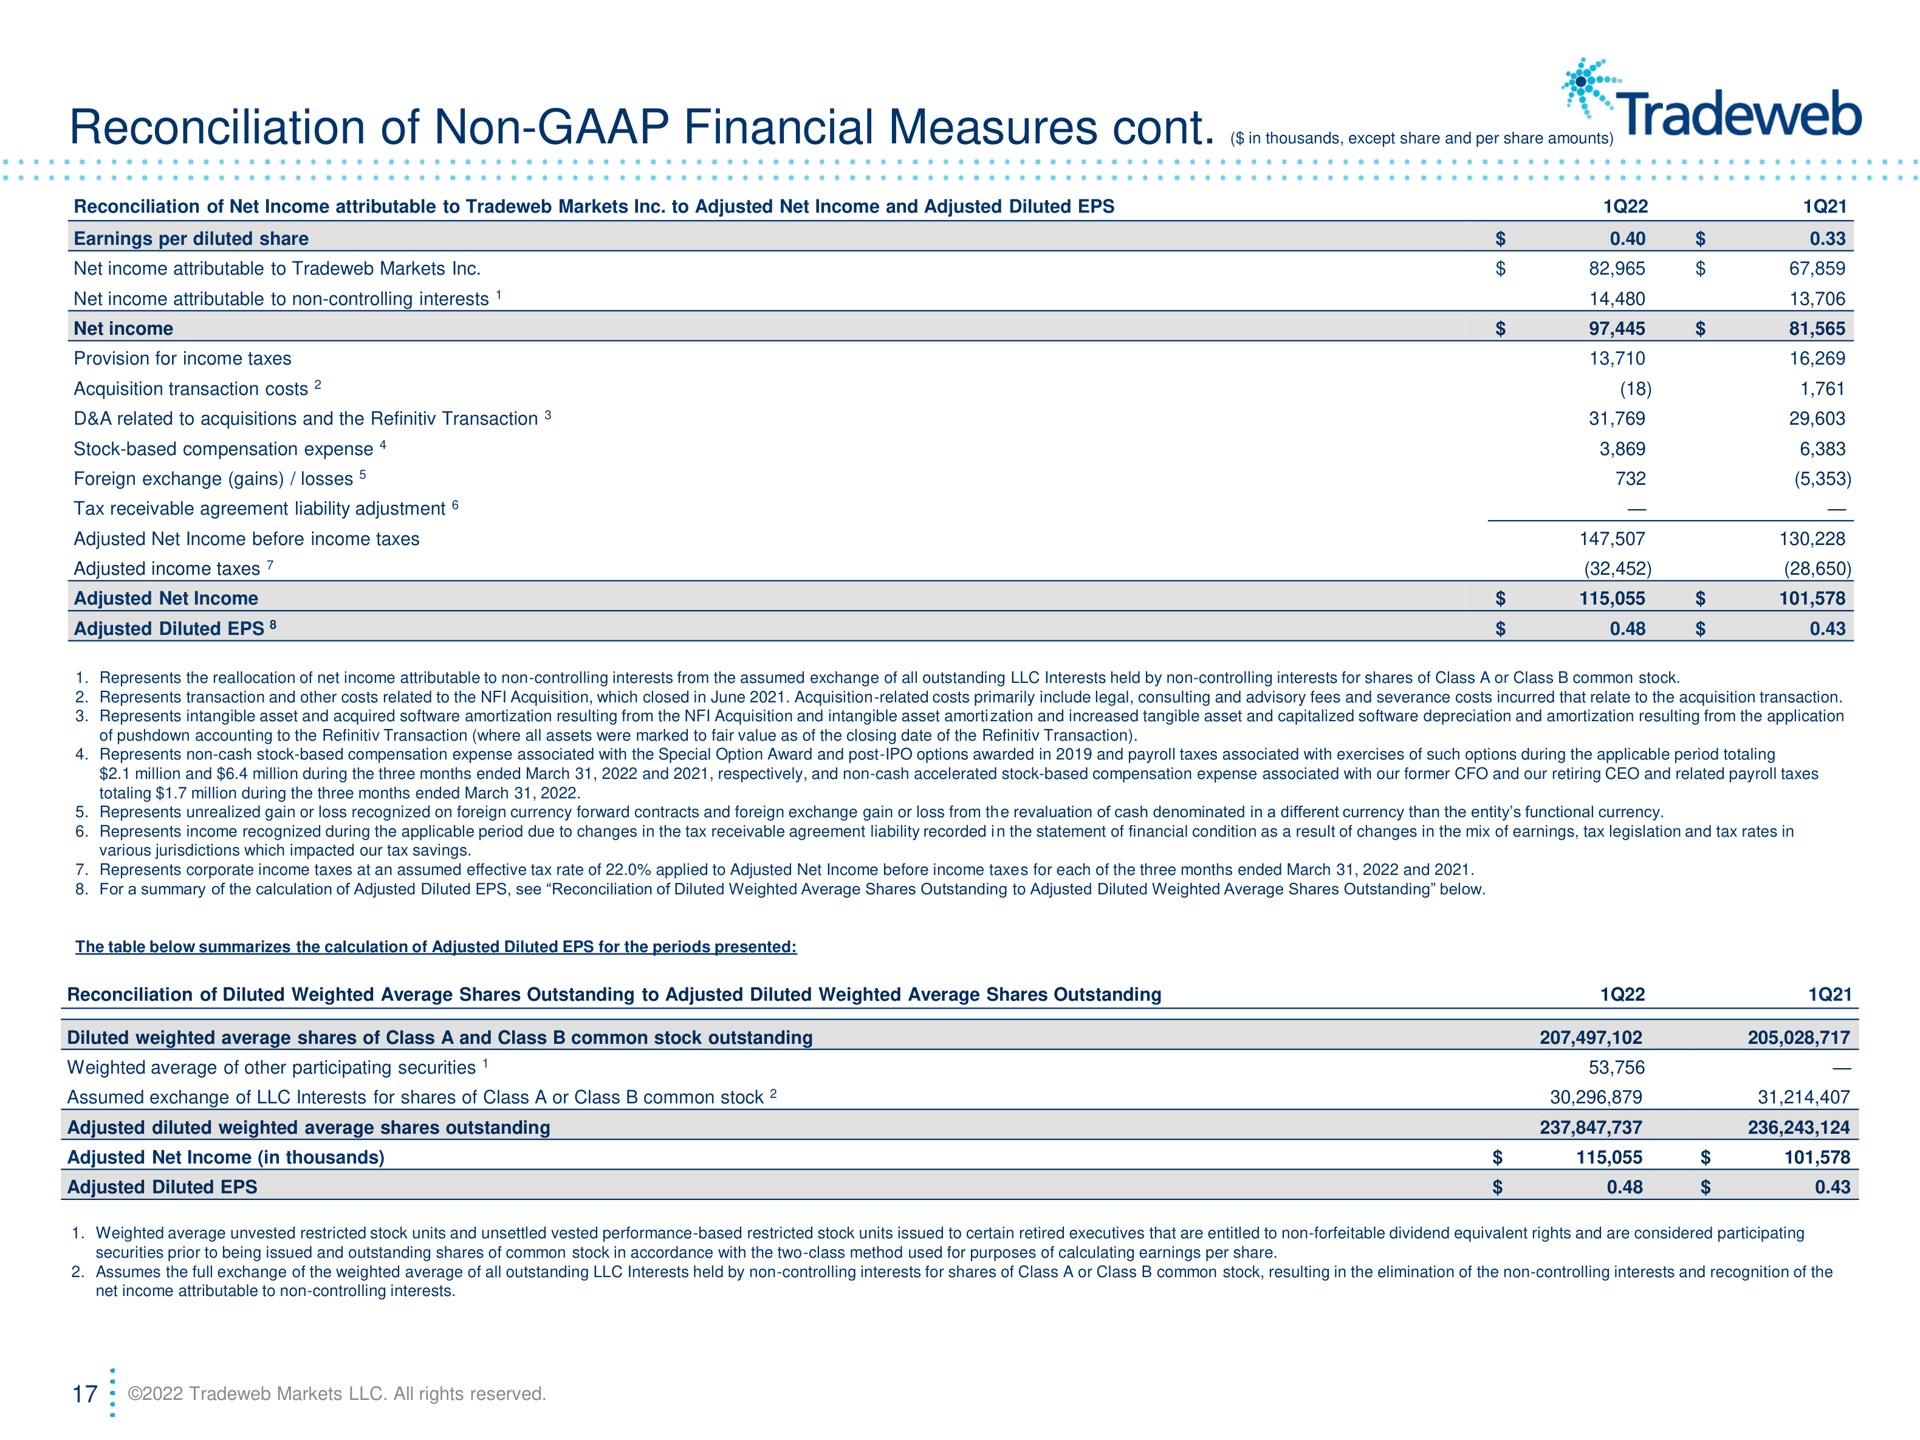 reconciliation of non financial measures in thousands except share and per share amounts | Tradeweb